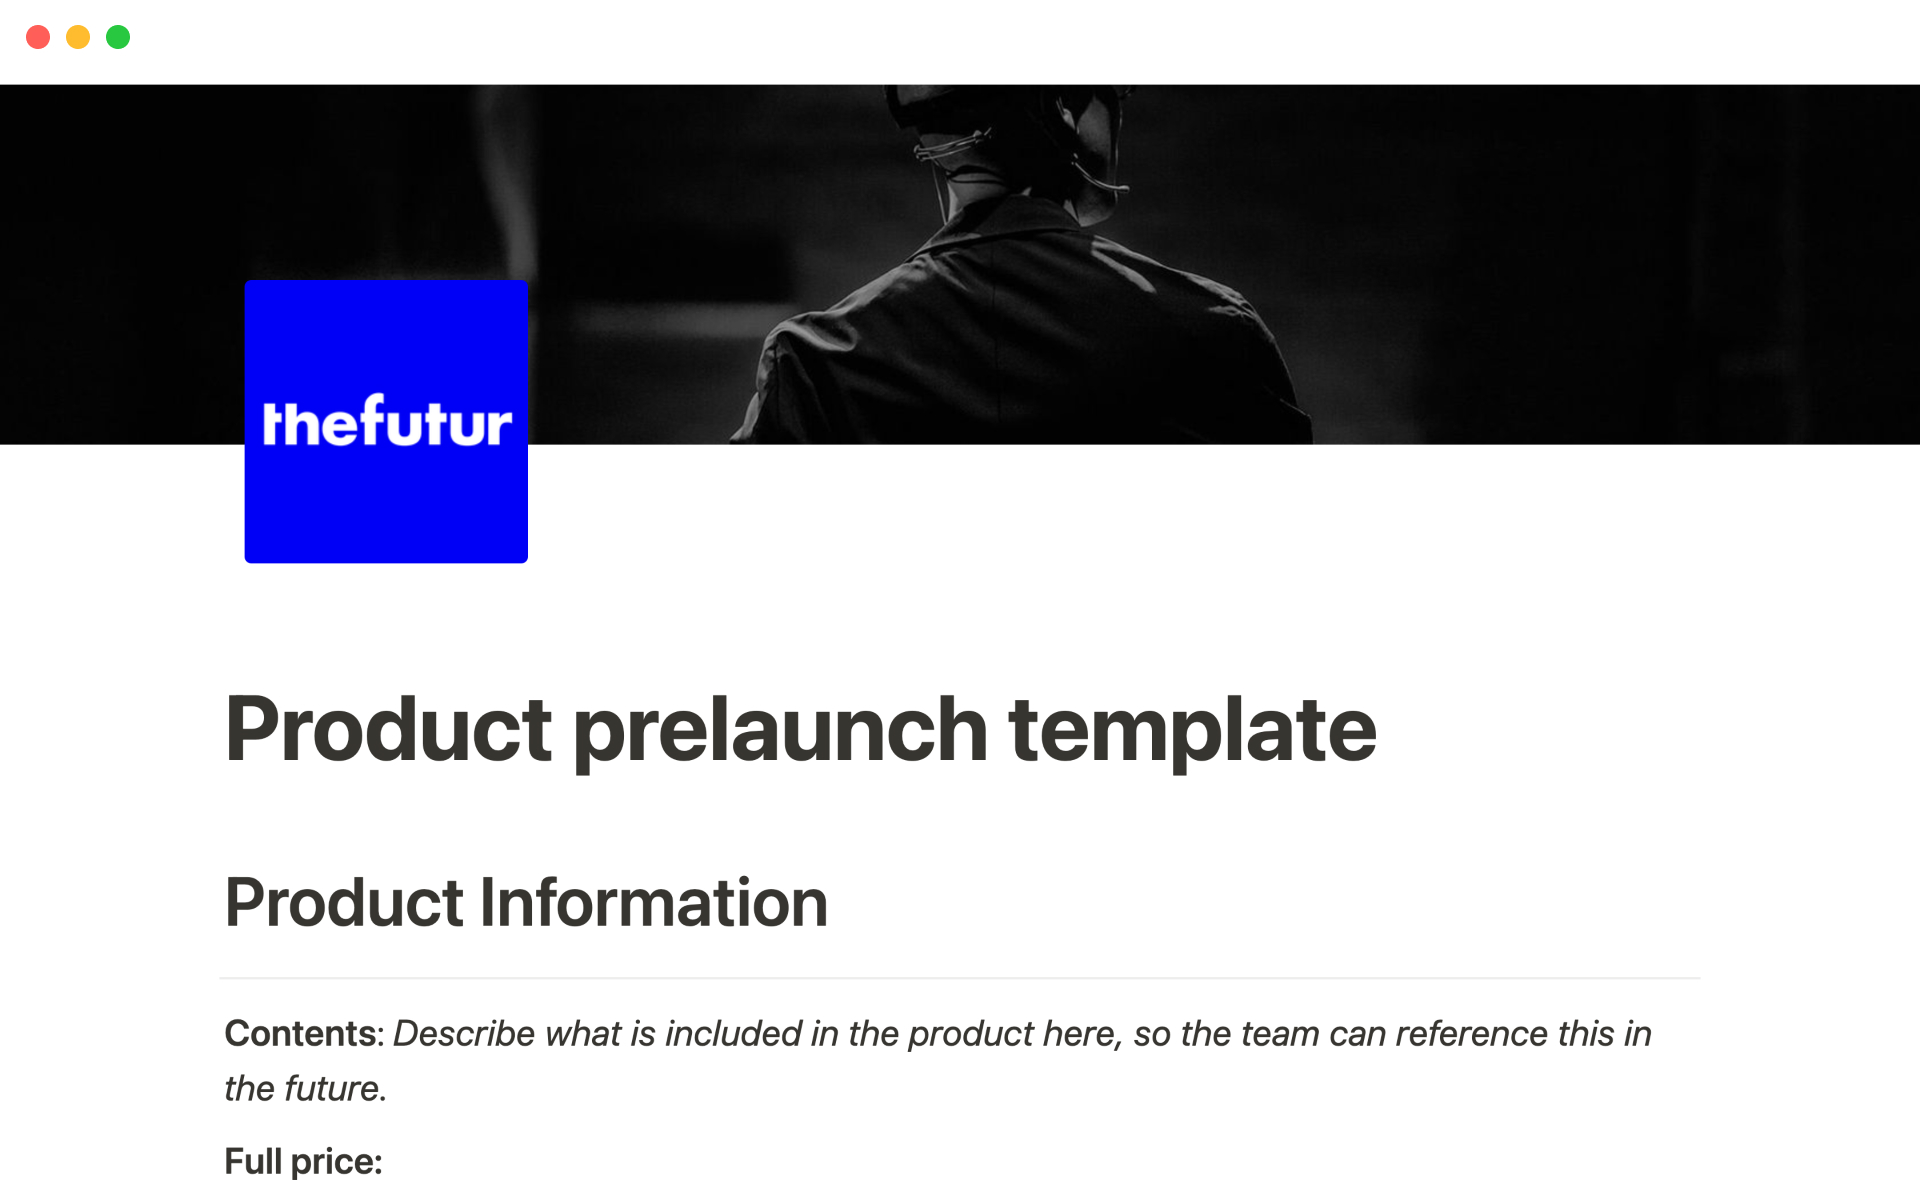 The desktop image for the Product prelaunch template